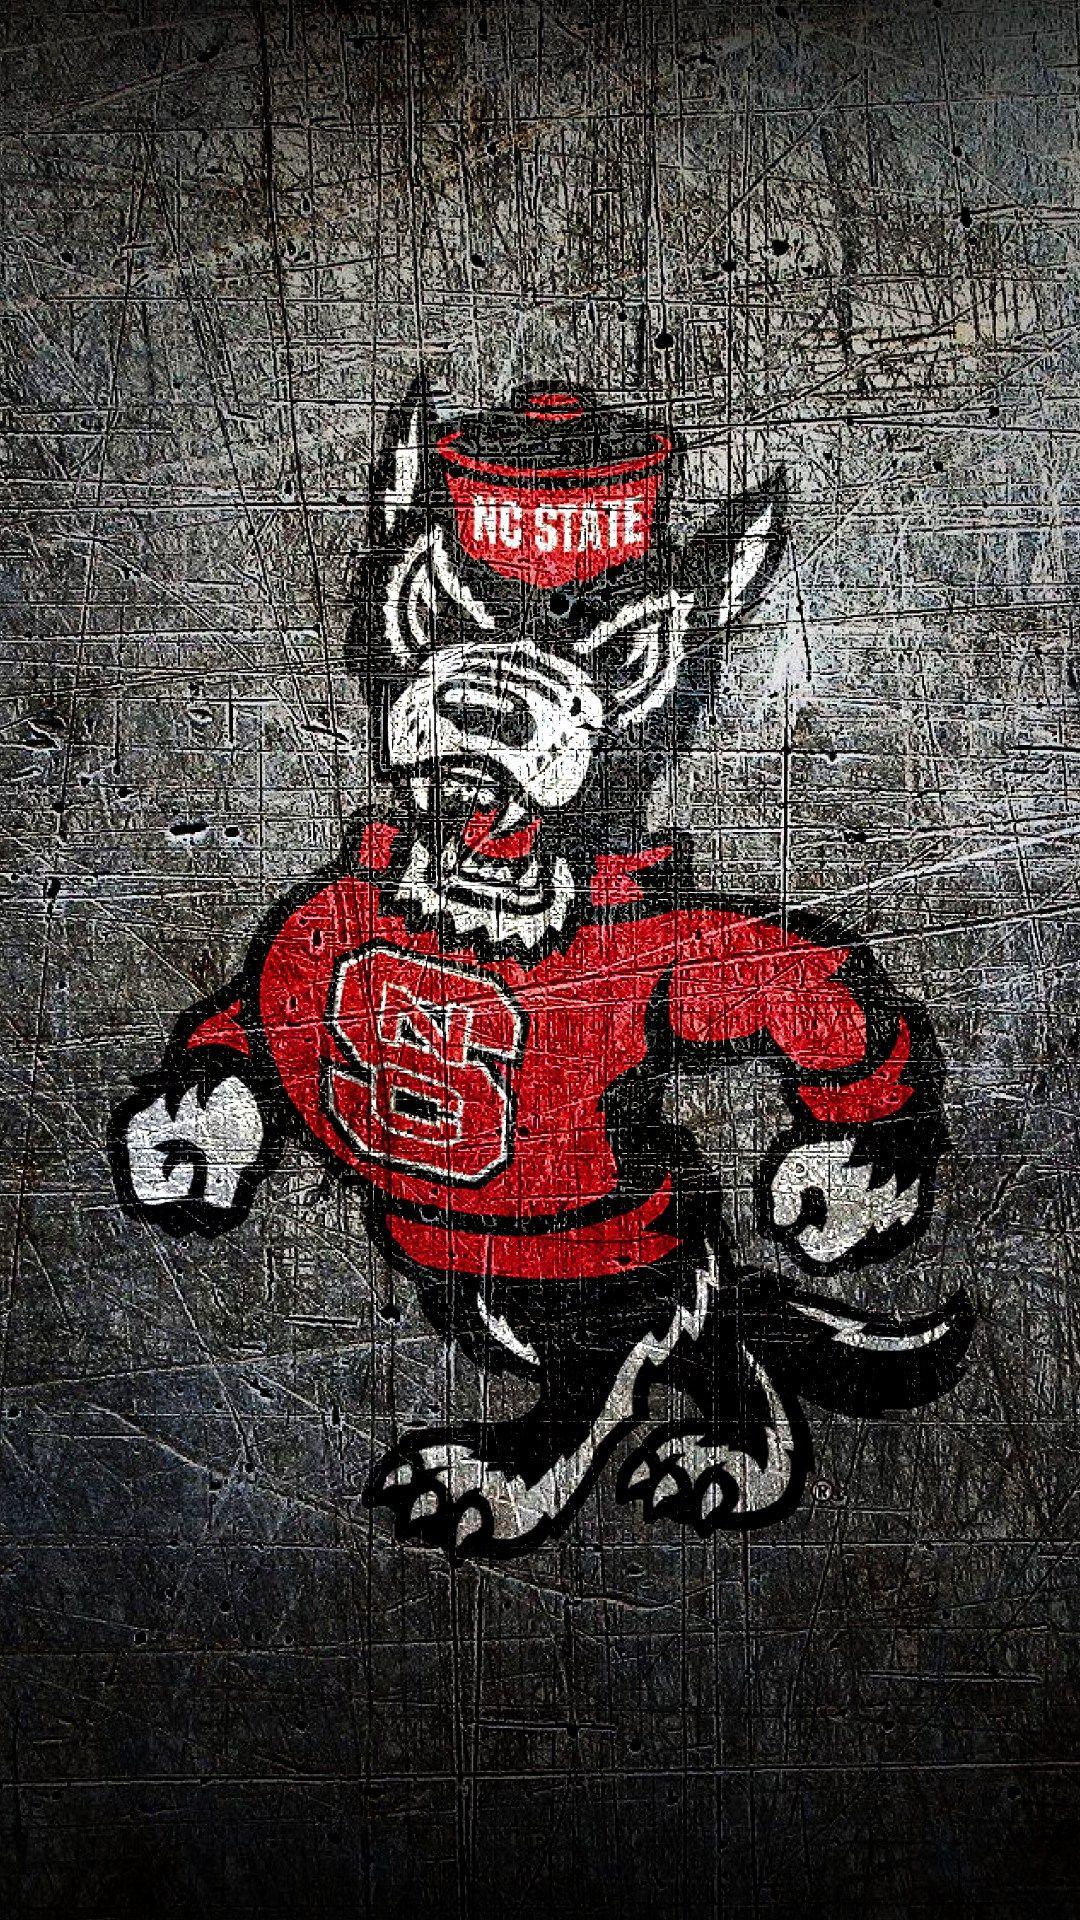 NC State Wallpaper From Carter Finley. Adorable